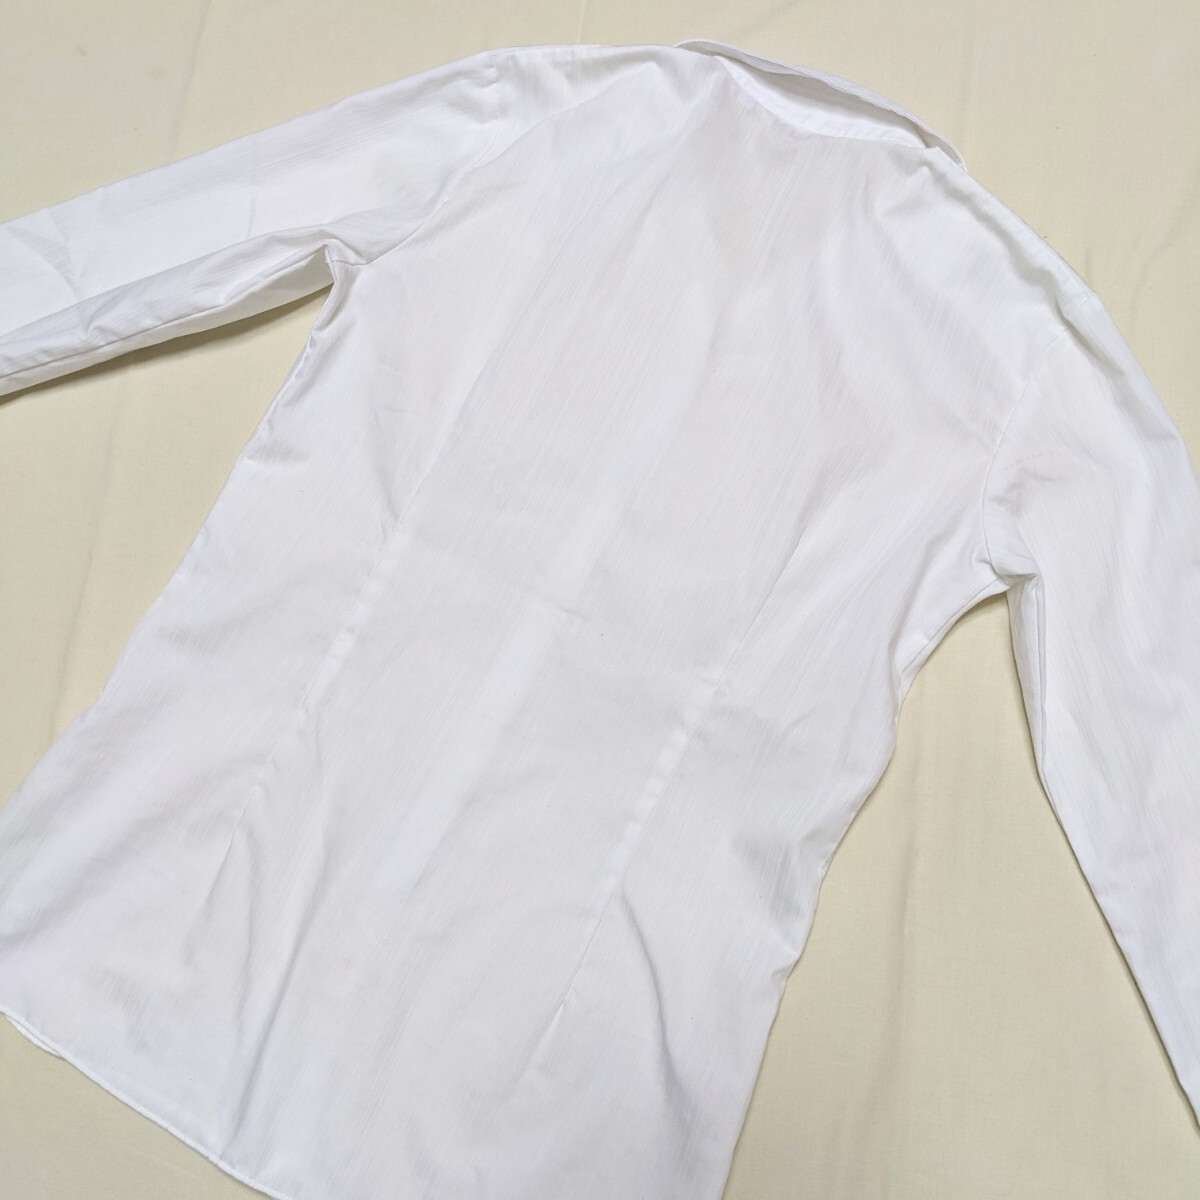 *FD76 ORIHICA RHYMEolihika formal lady's M long sleeve shirt blouse white stripe . collar business ceremony 